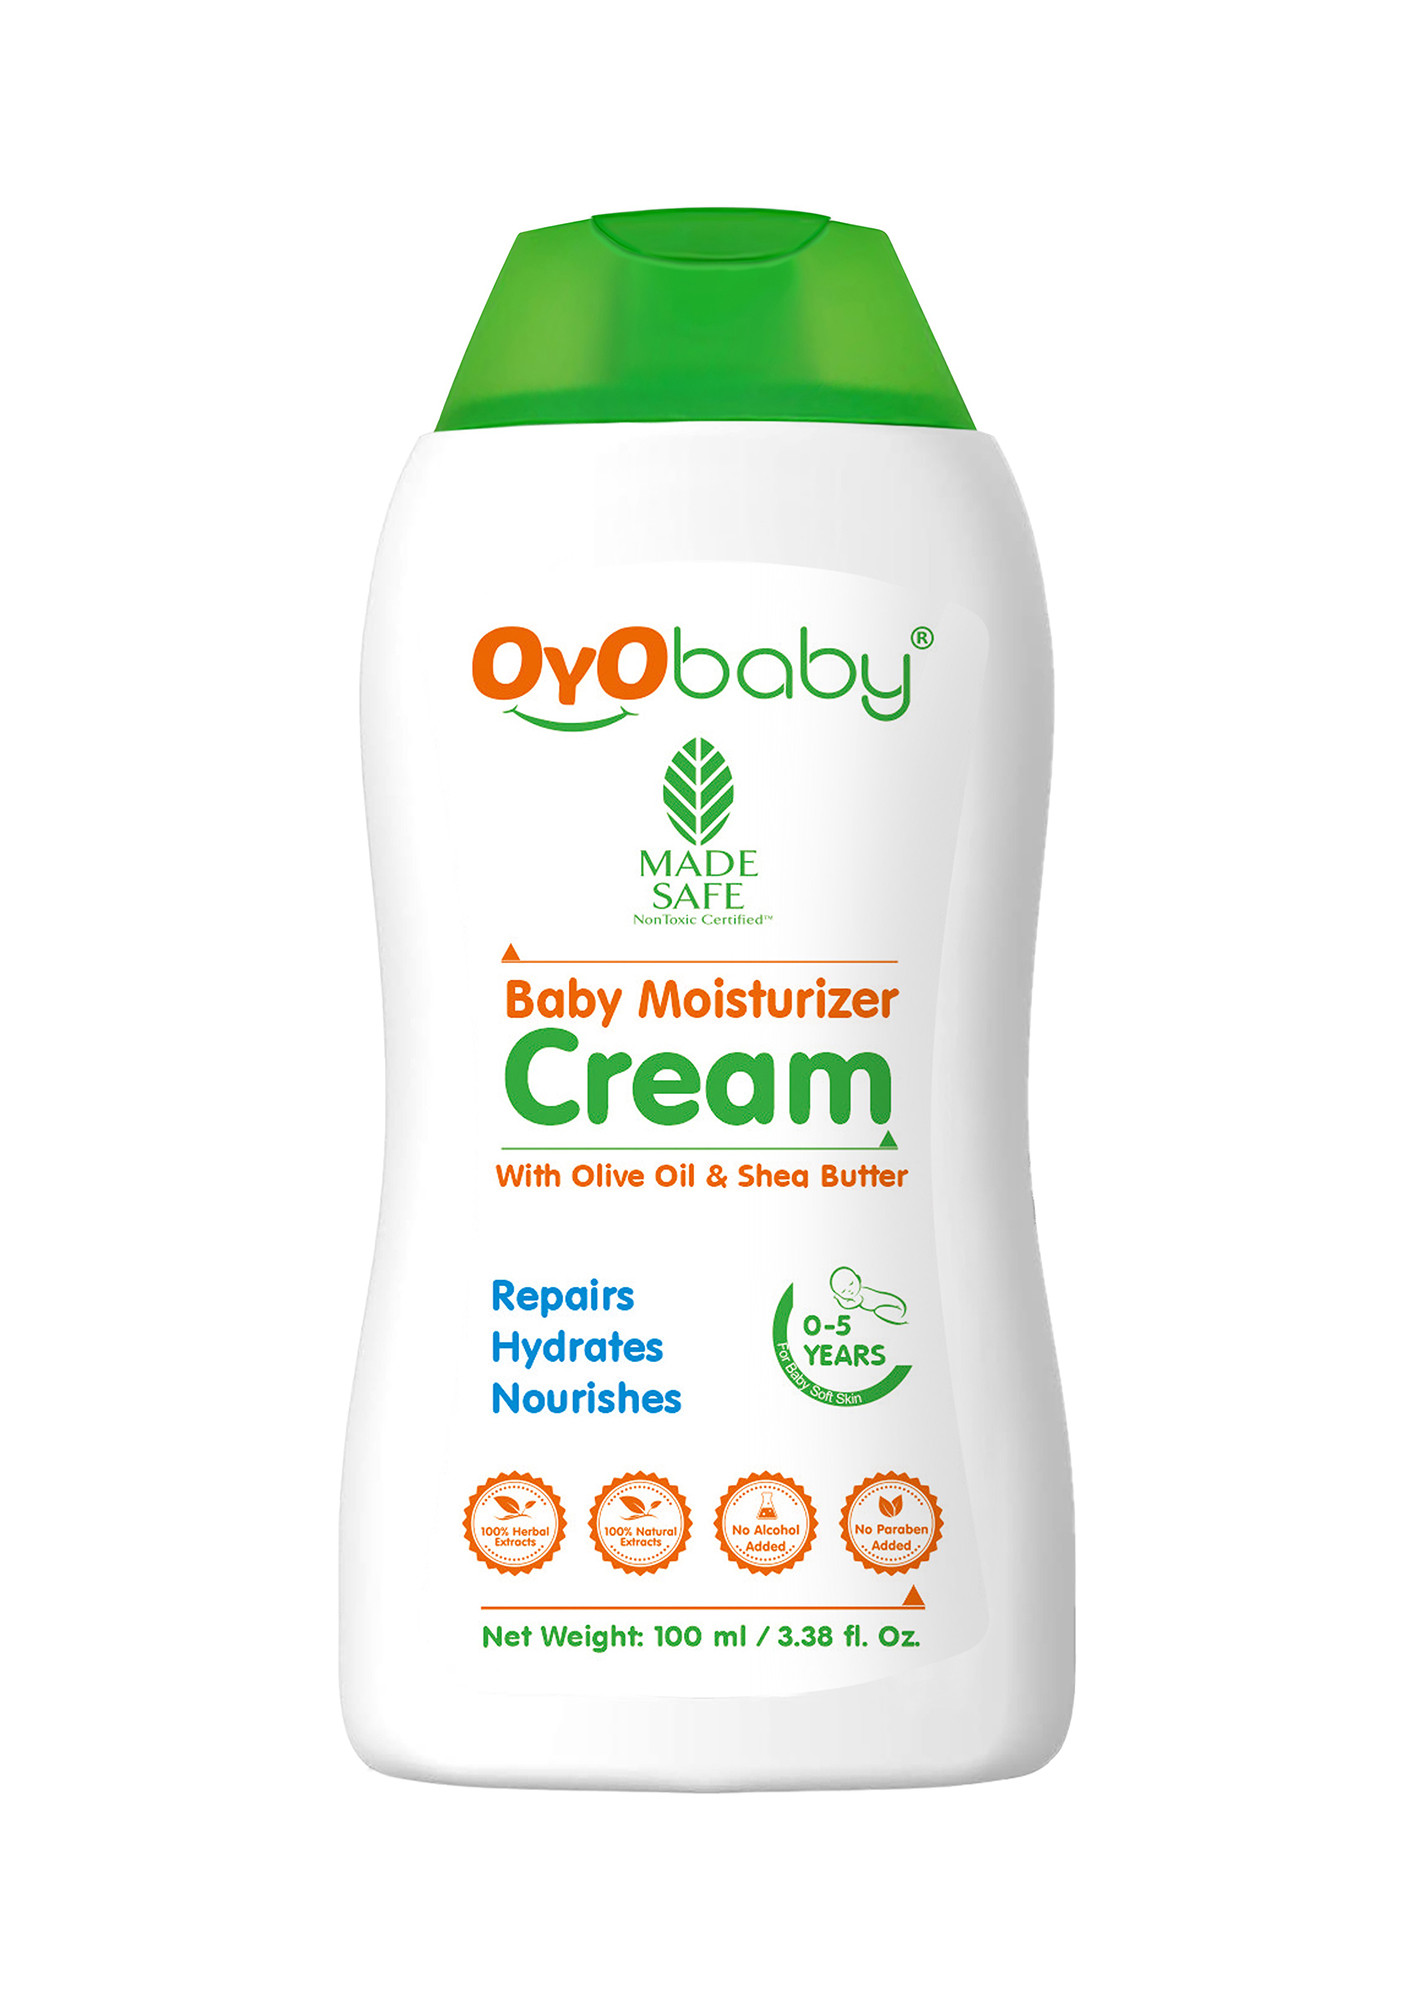 Oyo Baby Natural Baby Moisturizer Cream, pH balanced for Baby's Sensitive Skin with No Harmful Chemicals, Olive Oil & Shea Butter, No Paraben & Alcohol Baby Moisturizer Cream (100 ml)-OB-2302